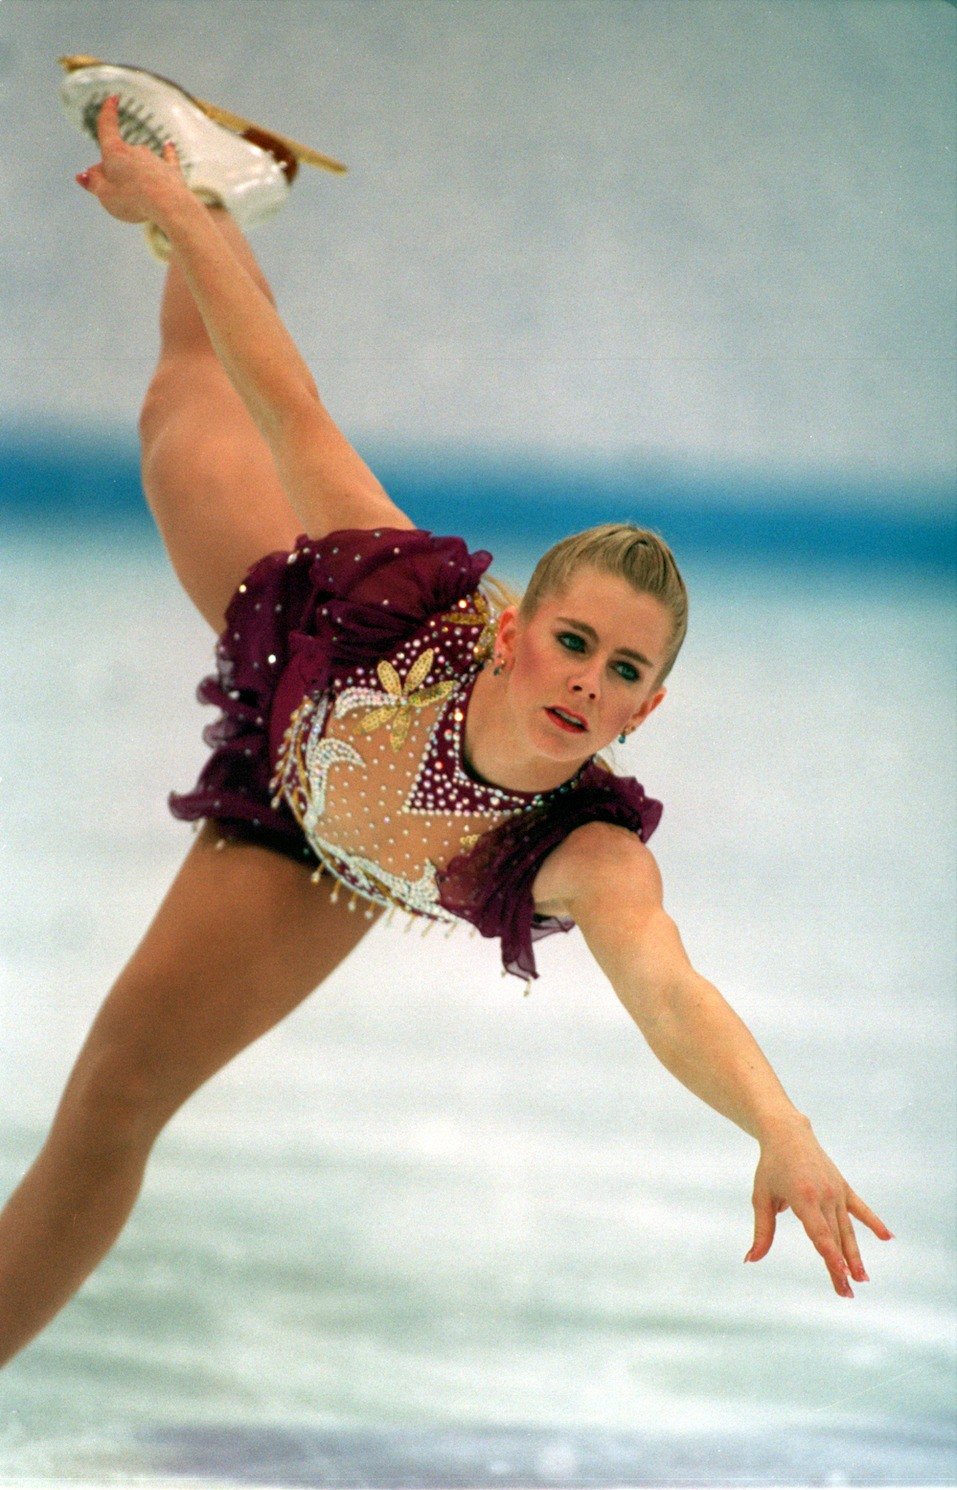 TONYA HARDING OF THE UNITED STATES IN ACTION IN THE FREE PROGRAM AT THE 1994 LILLEHAMMER WINTER OLYMPICS